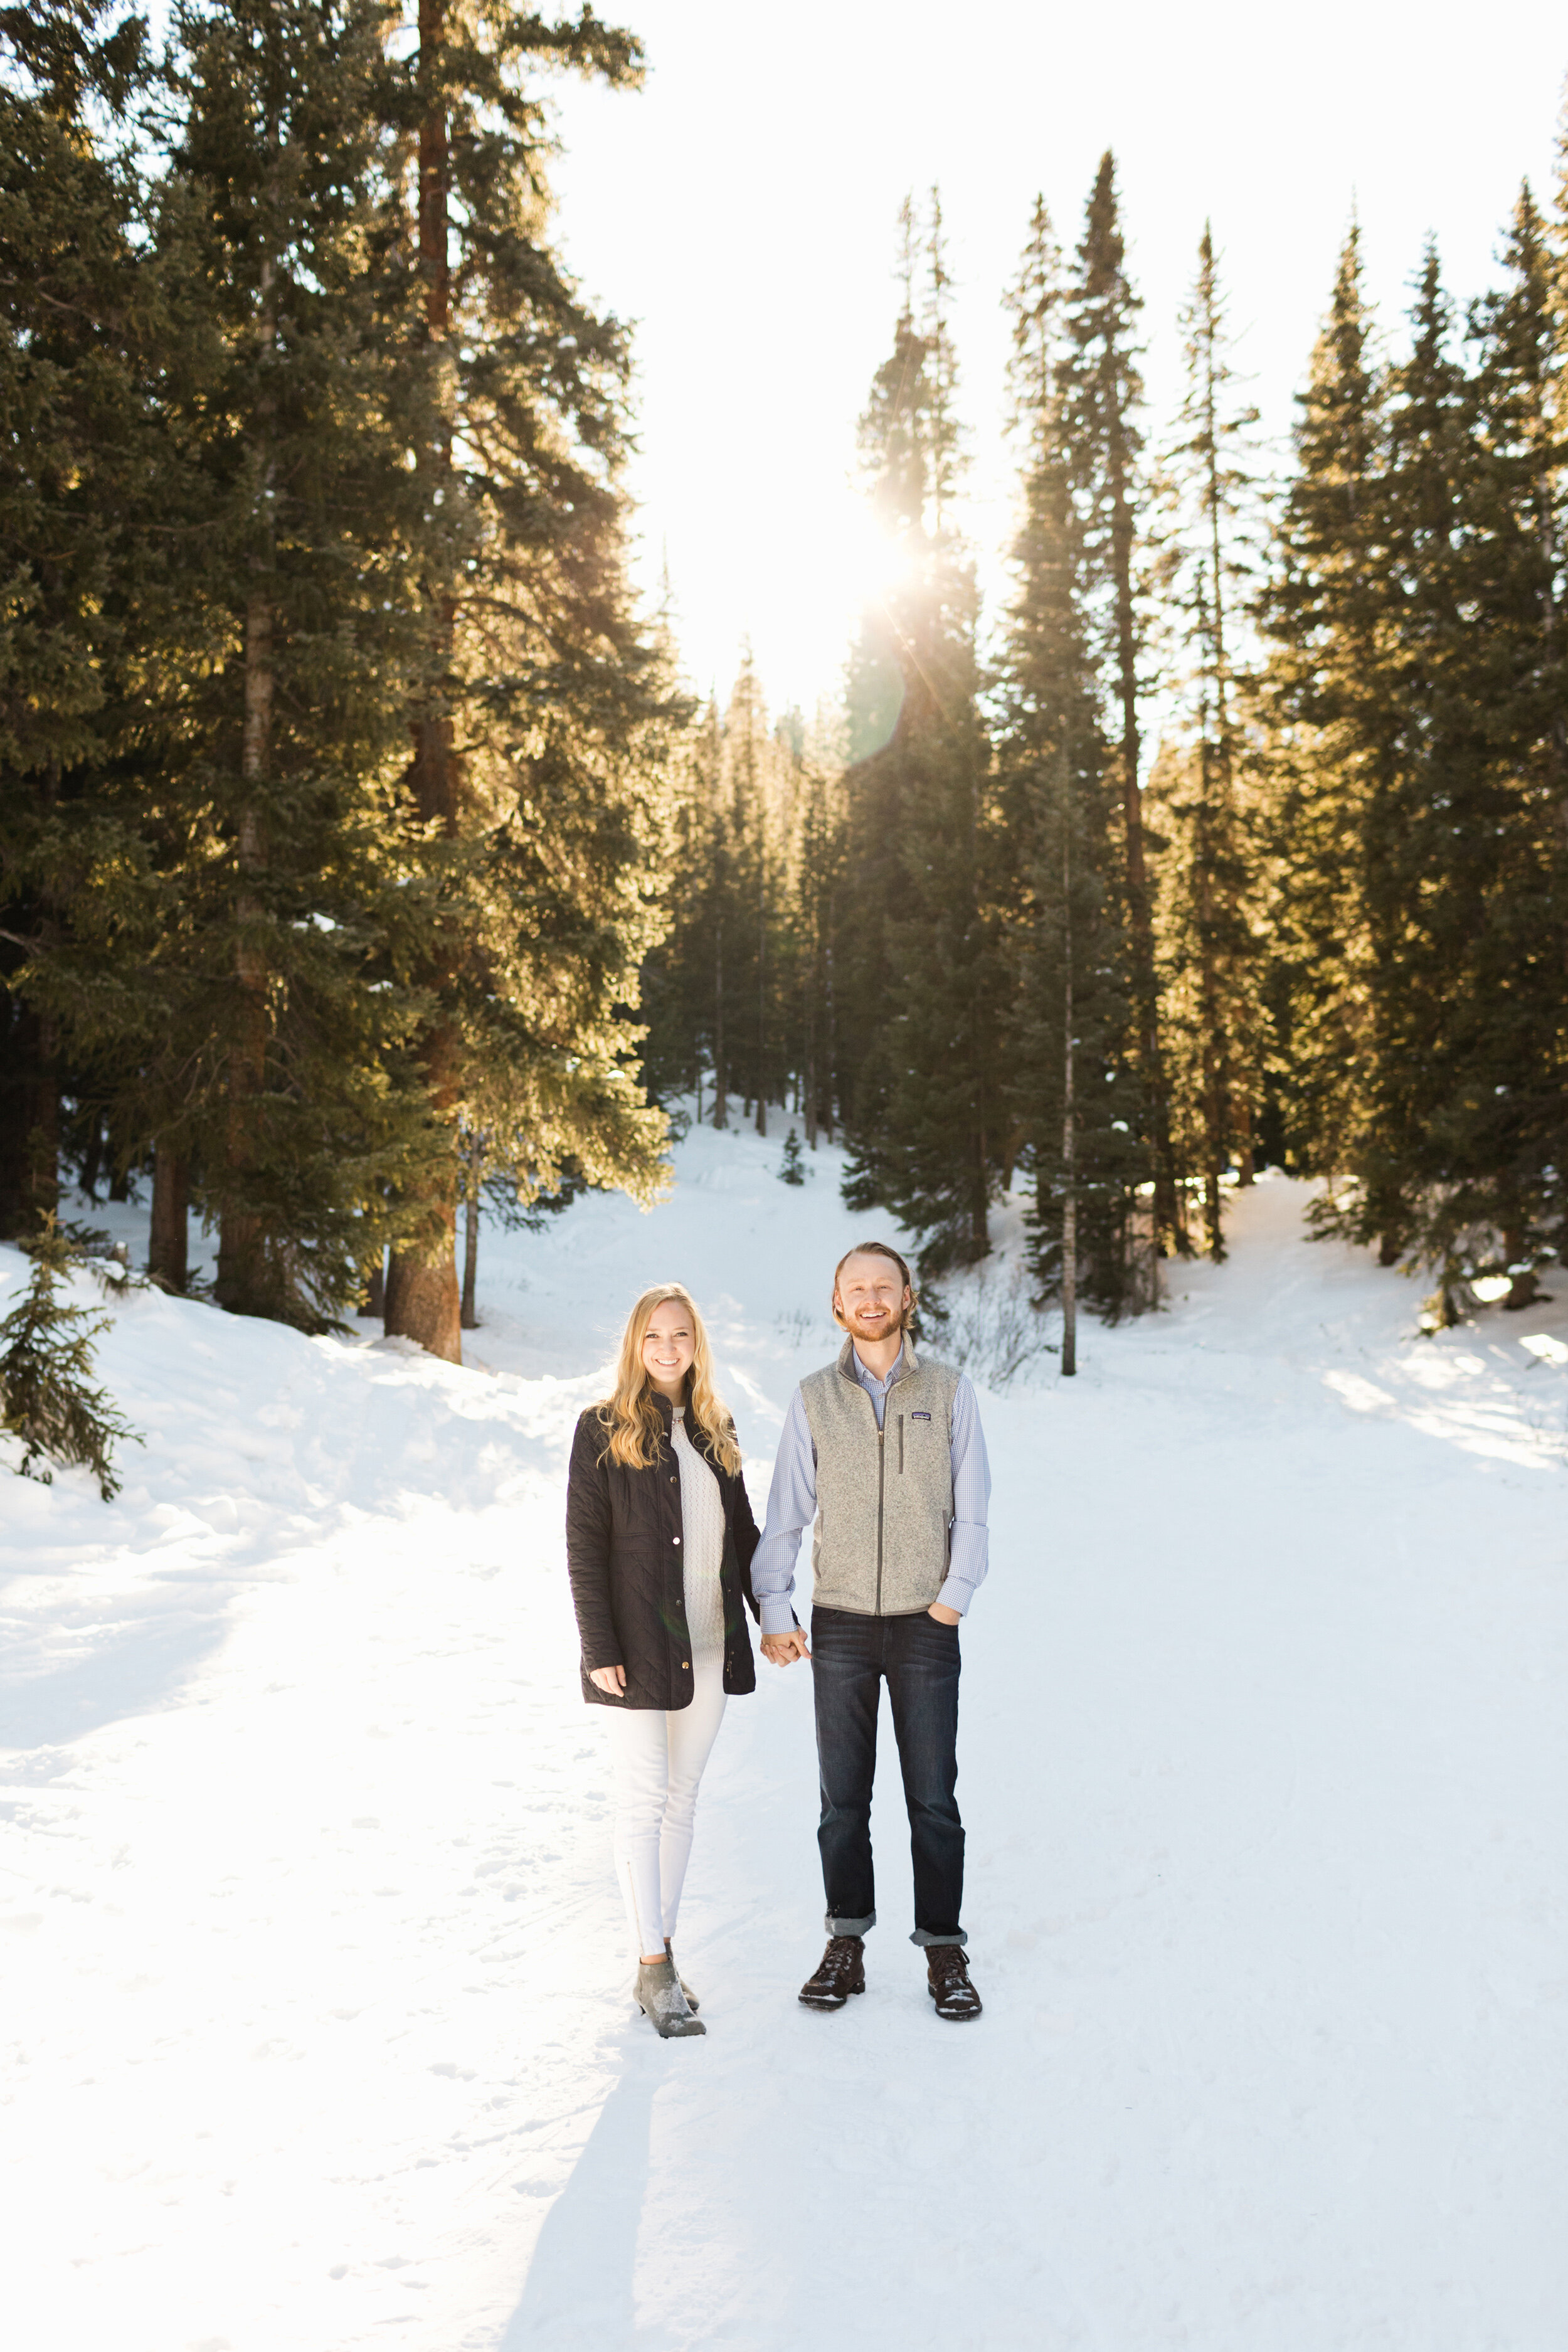 snowy-colorado-engagement-photos-in-the-forest-by-jackie-cooper-photo-02.jpg